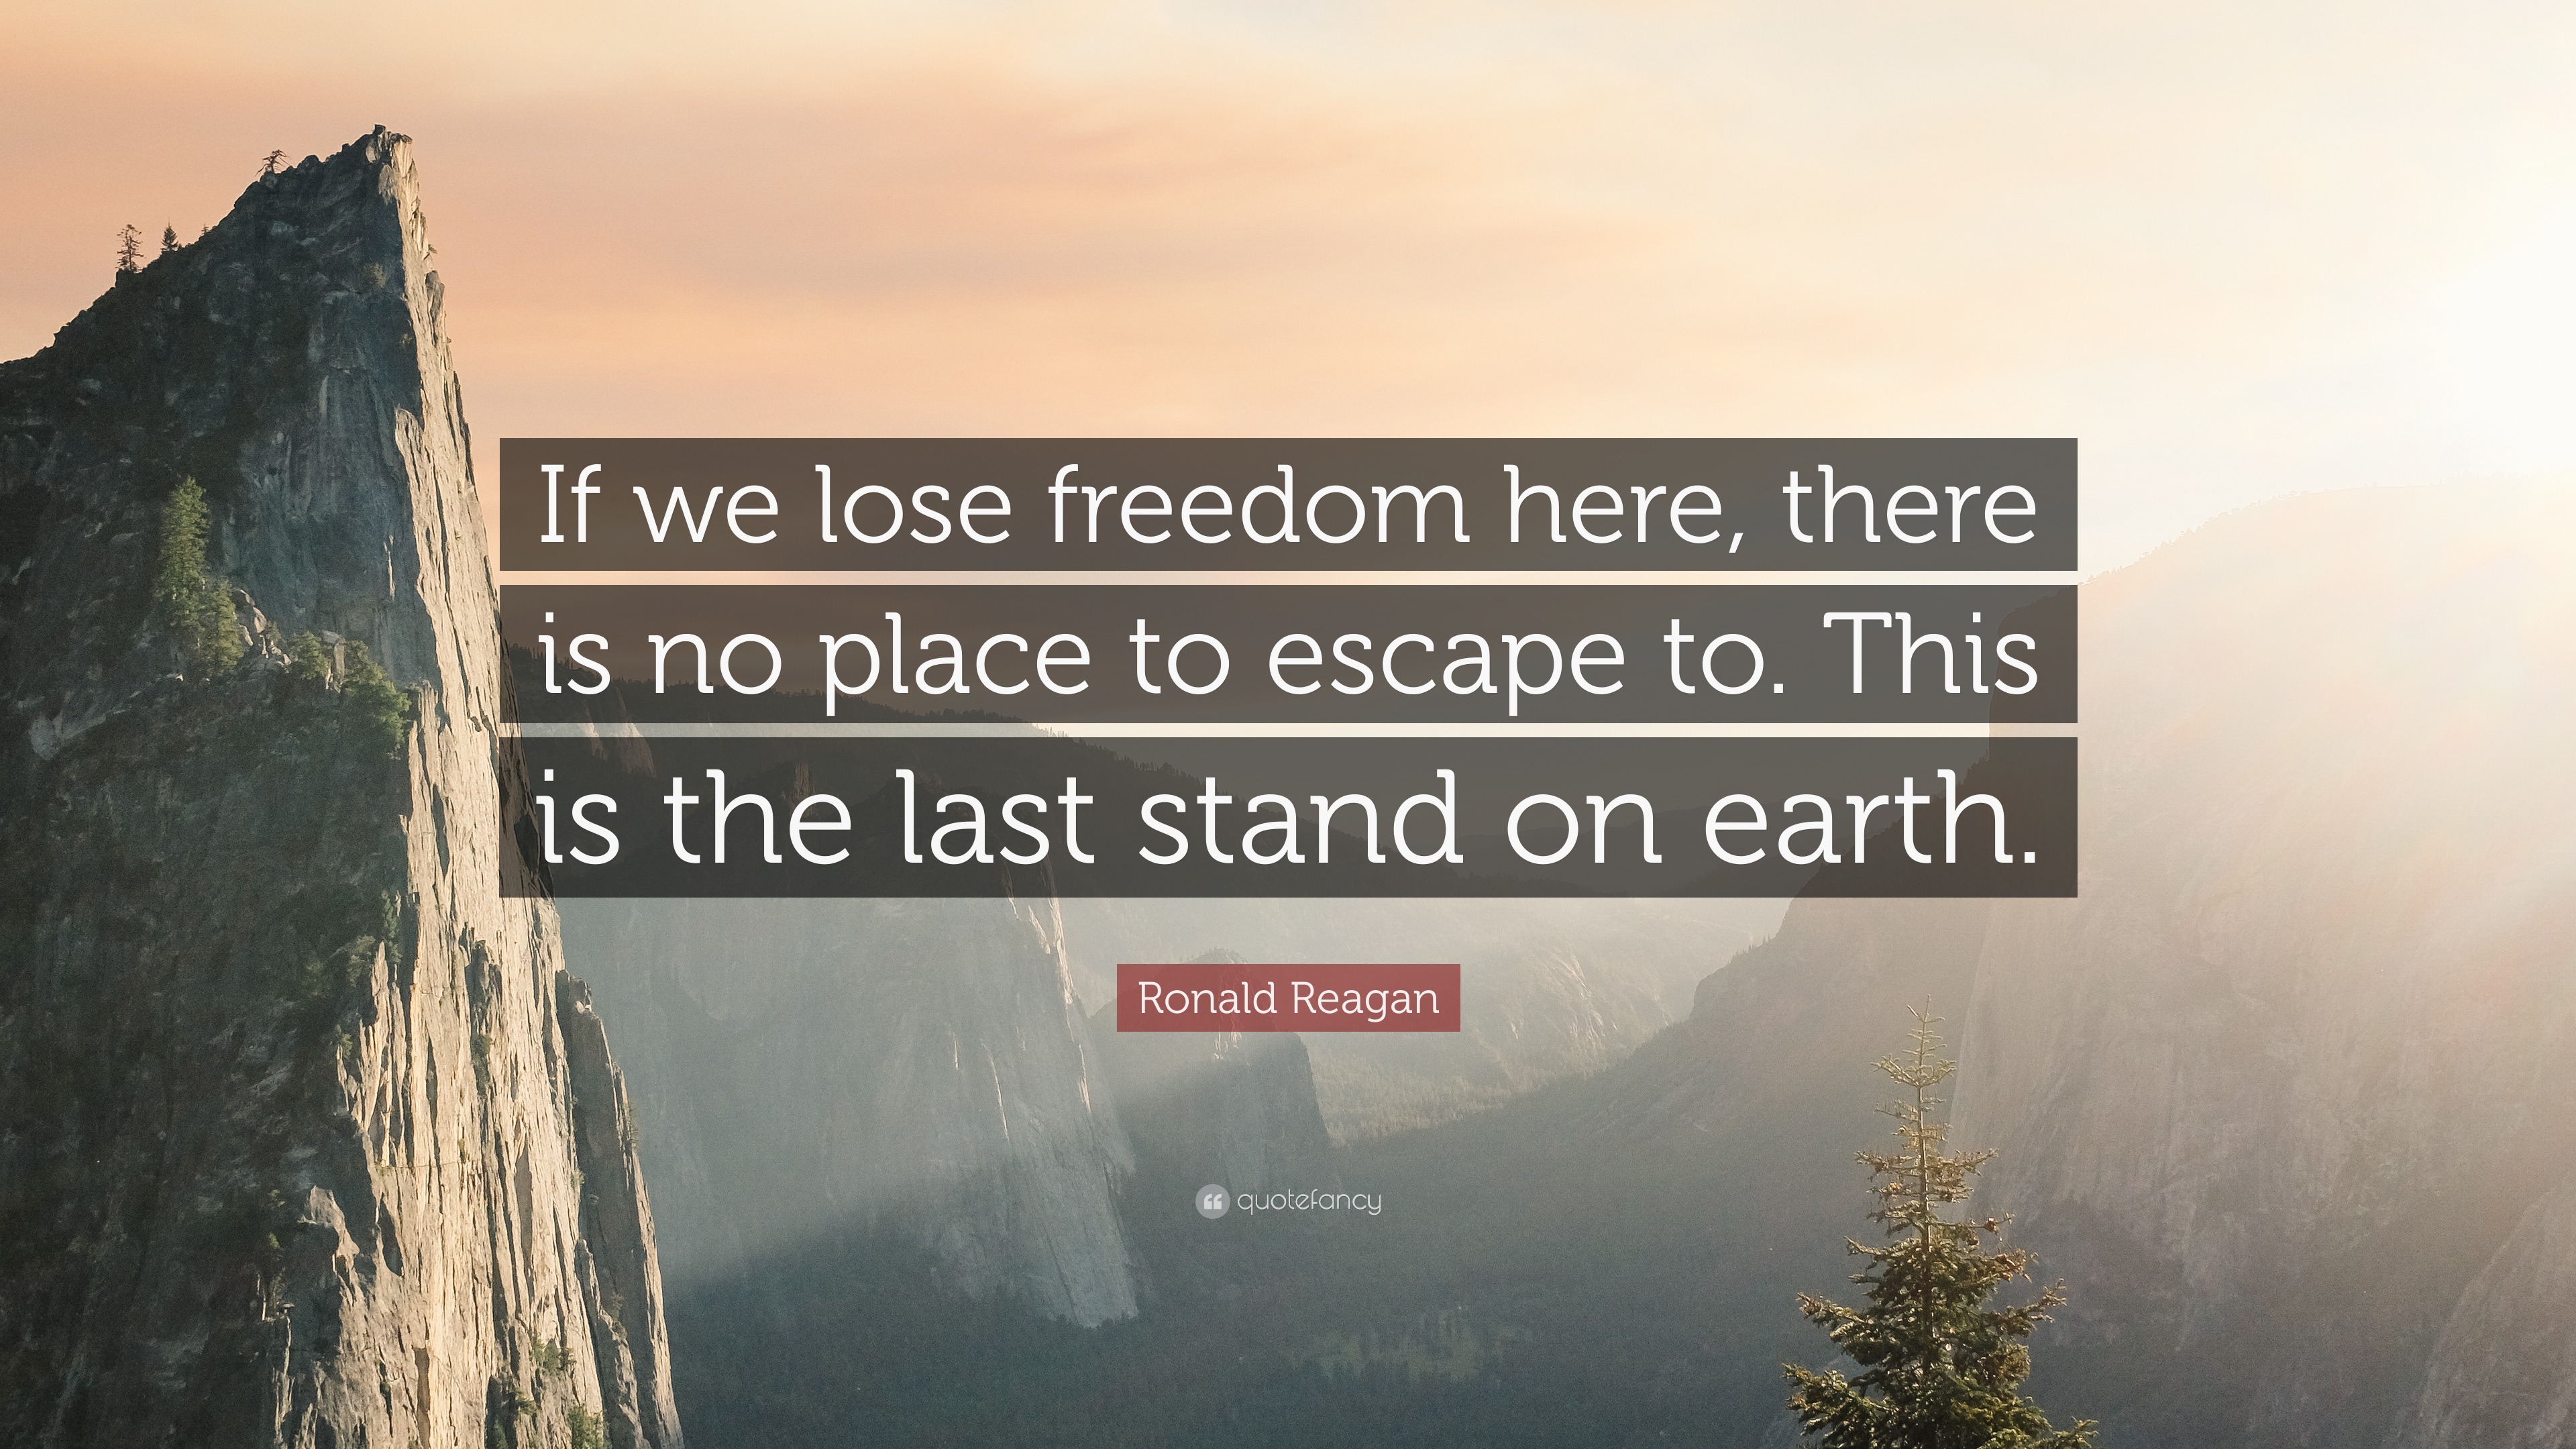 Ronald Reagan Quote: “If we lose freedom here, there is no place to